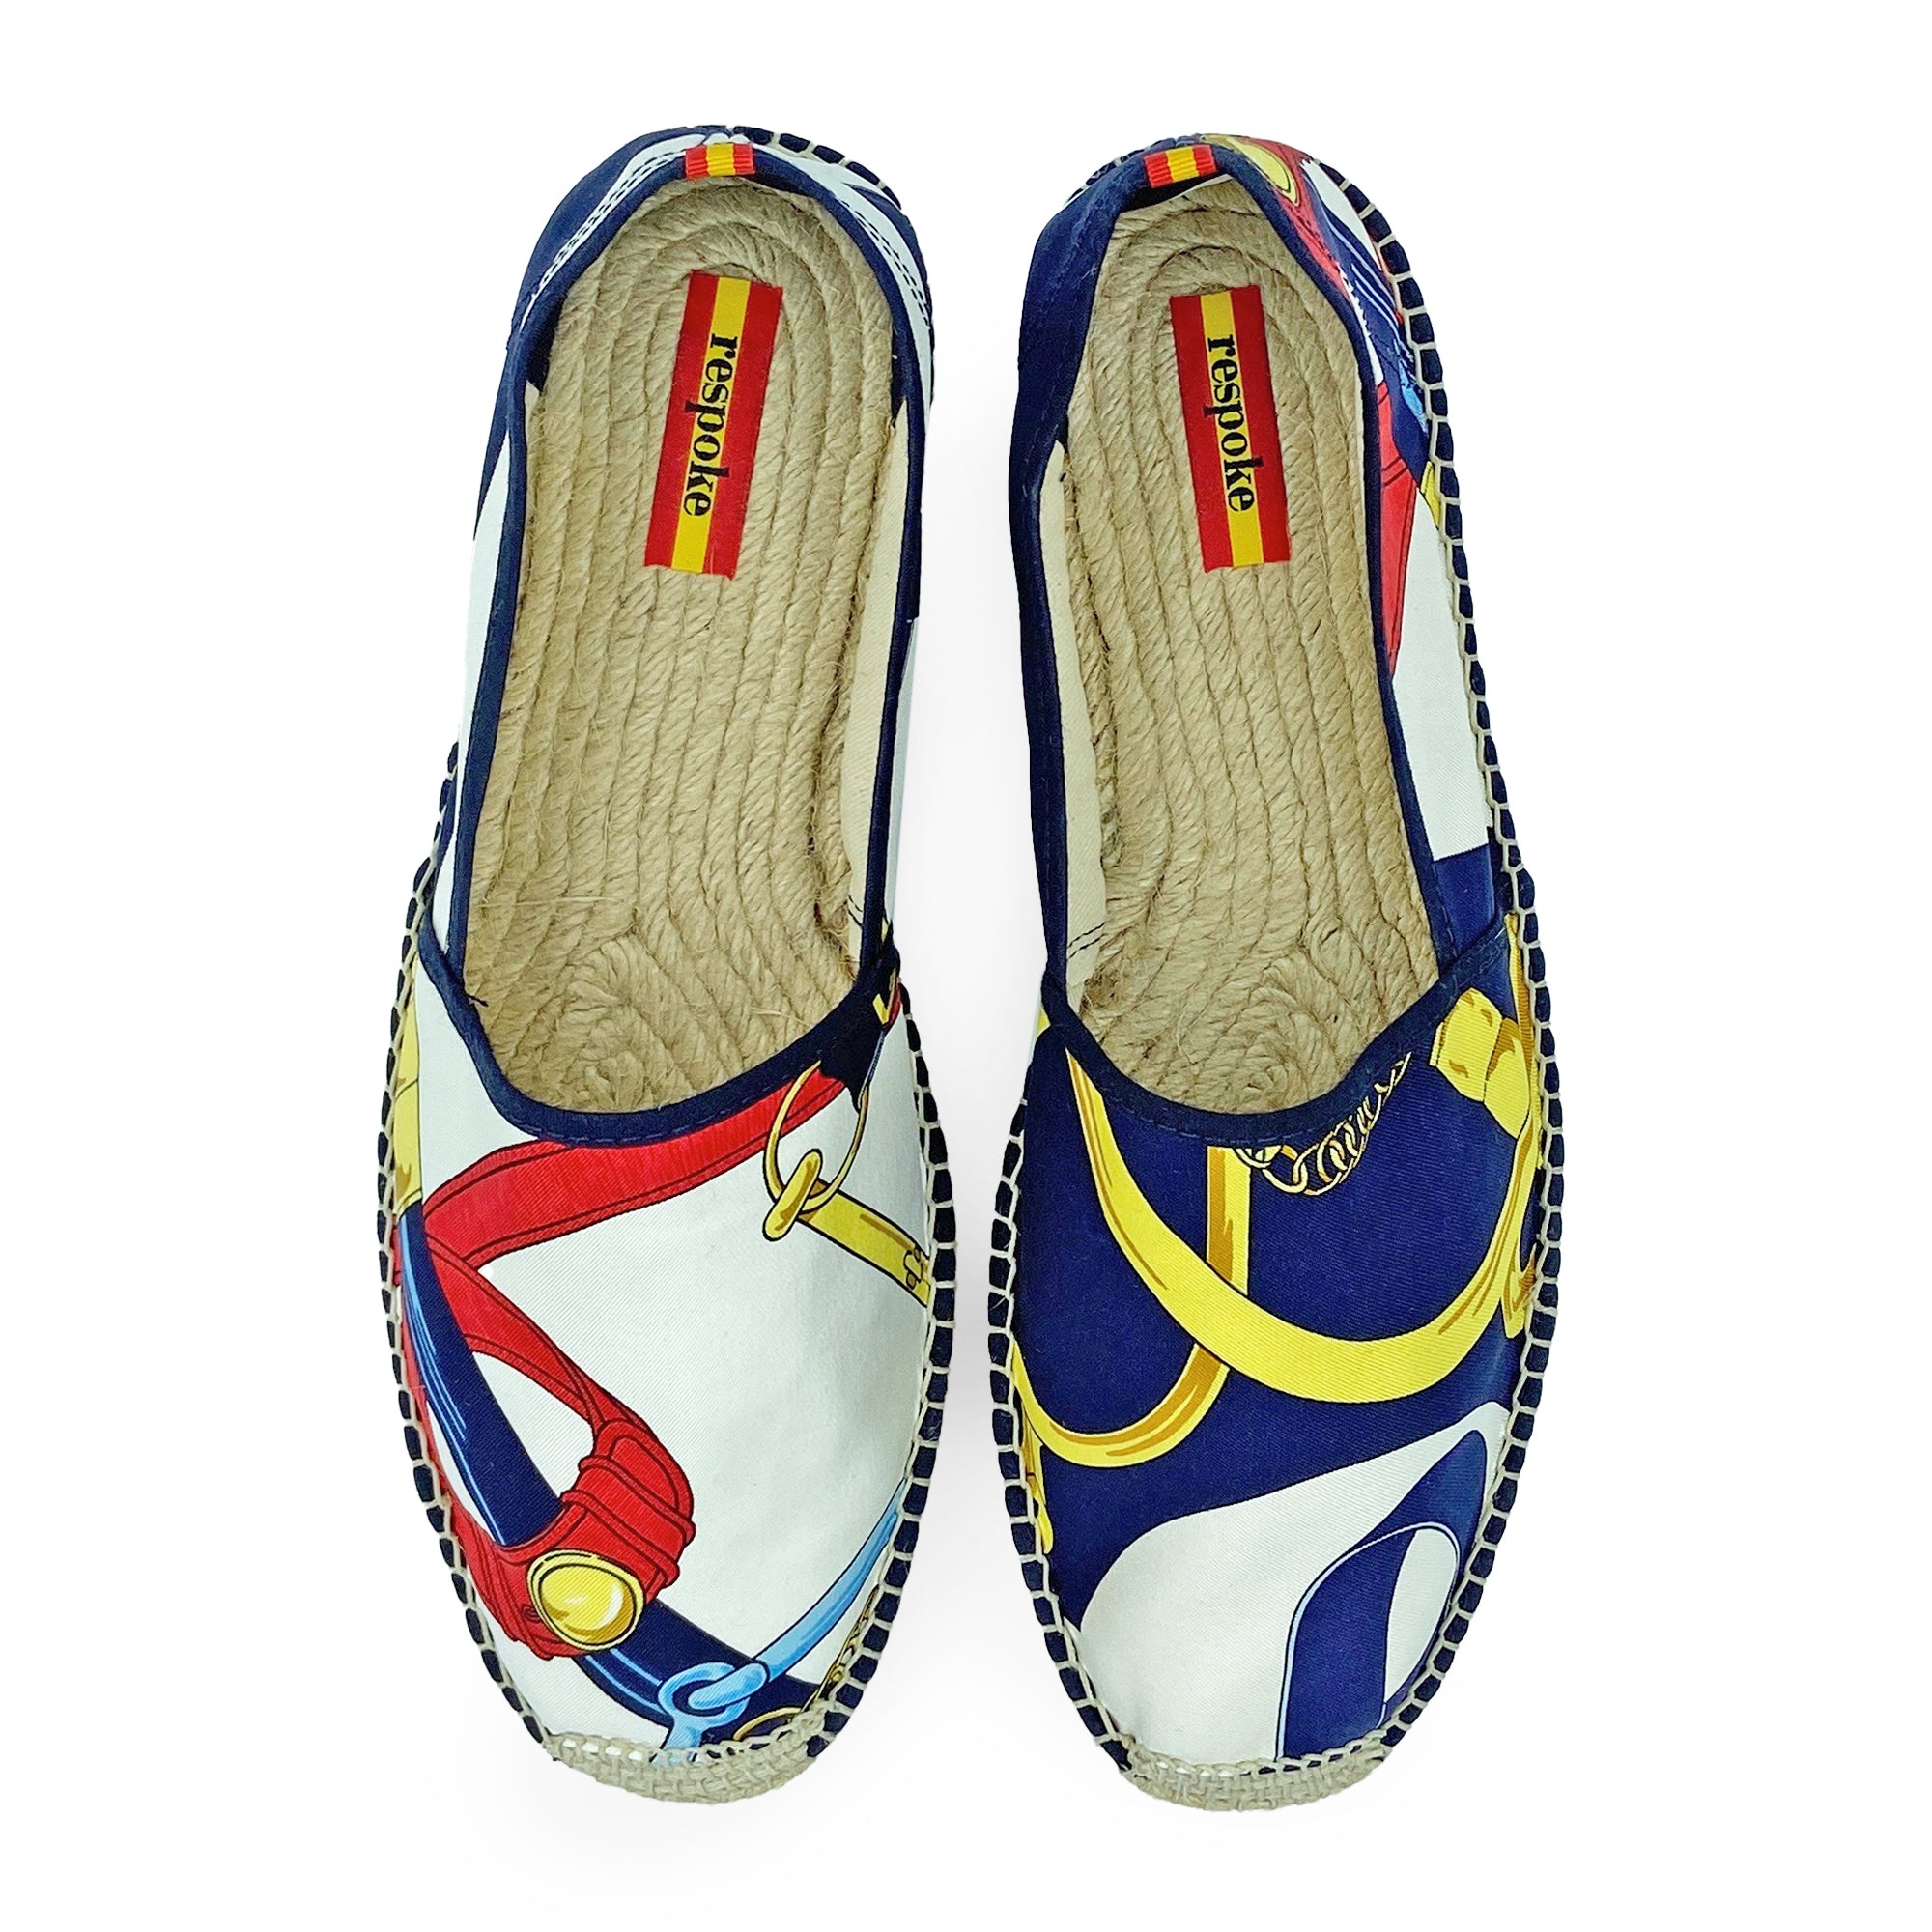 EPERON Red/White/Blue Classic Espadrilles